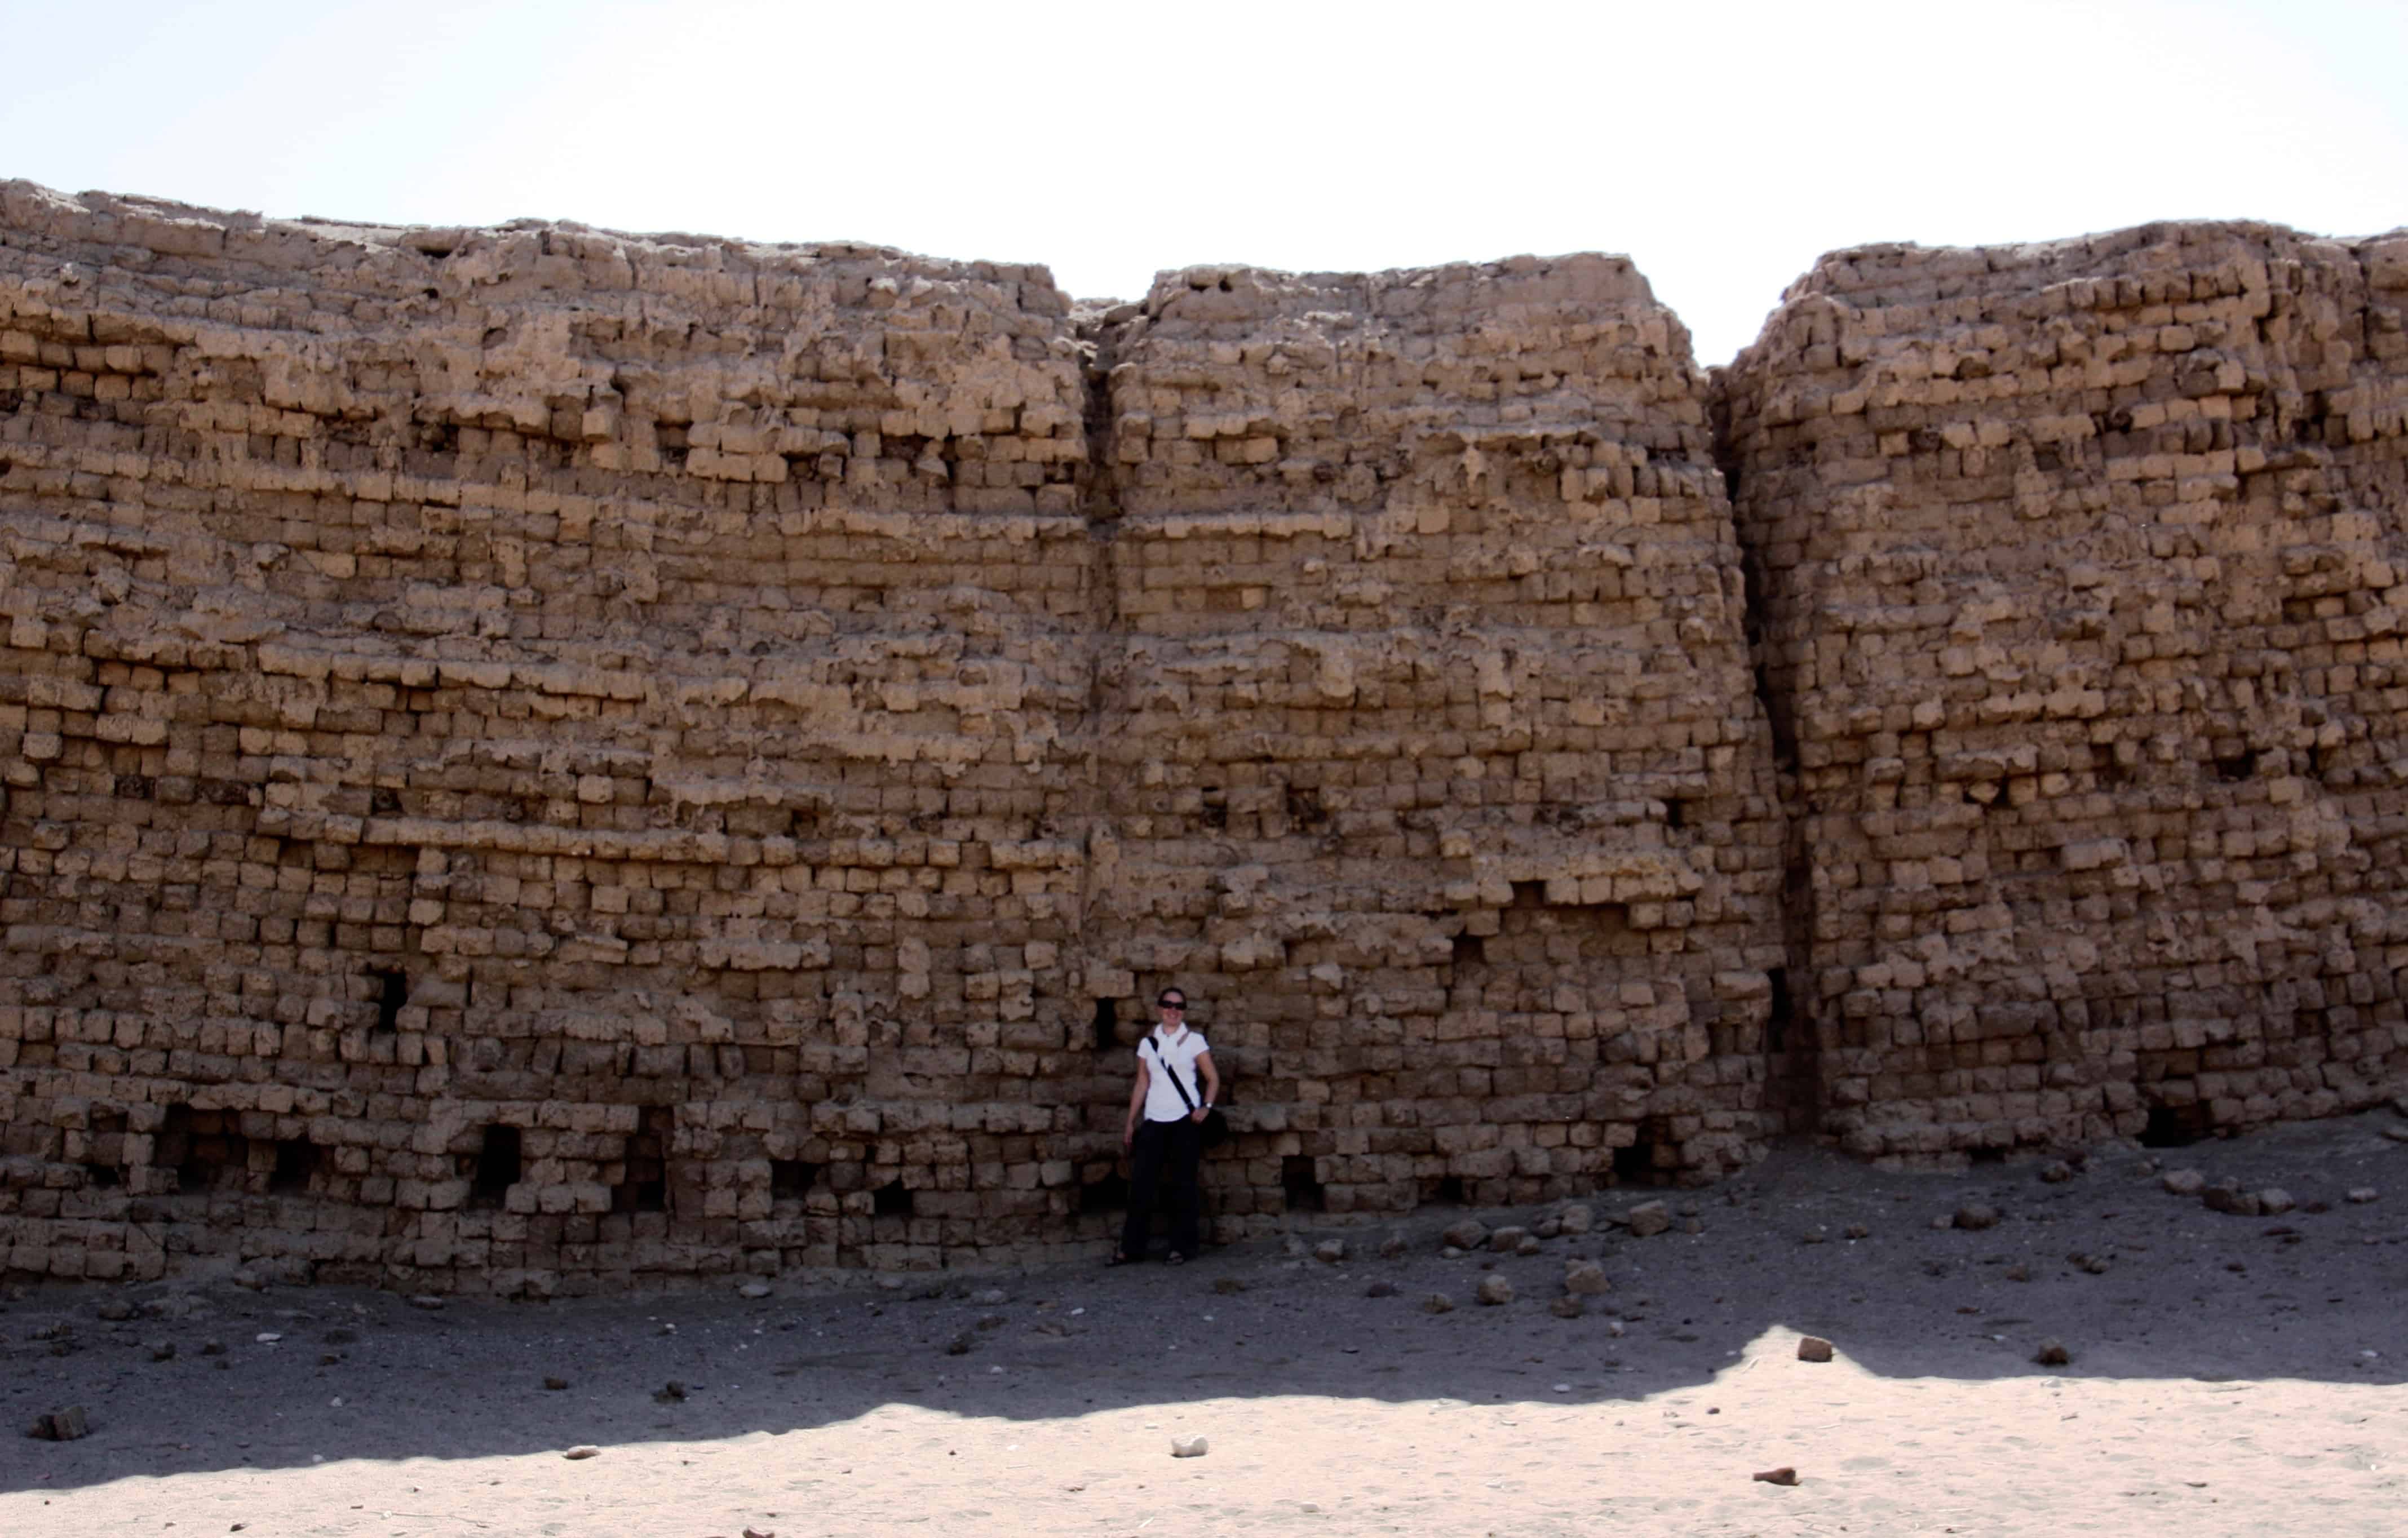 The 2,500-year-old brick city wall of Al-Kab still stands in Egypt.